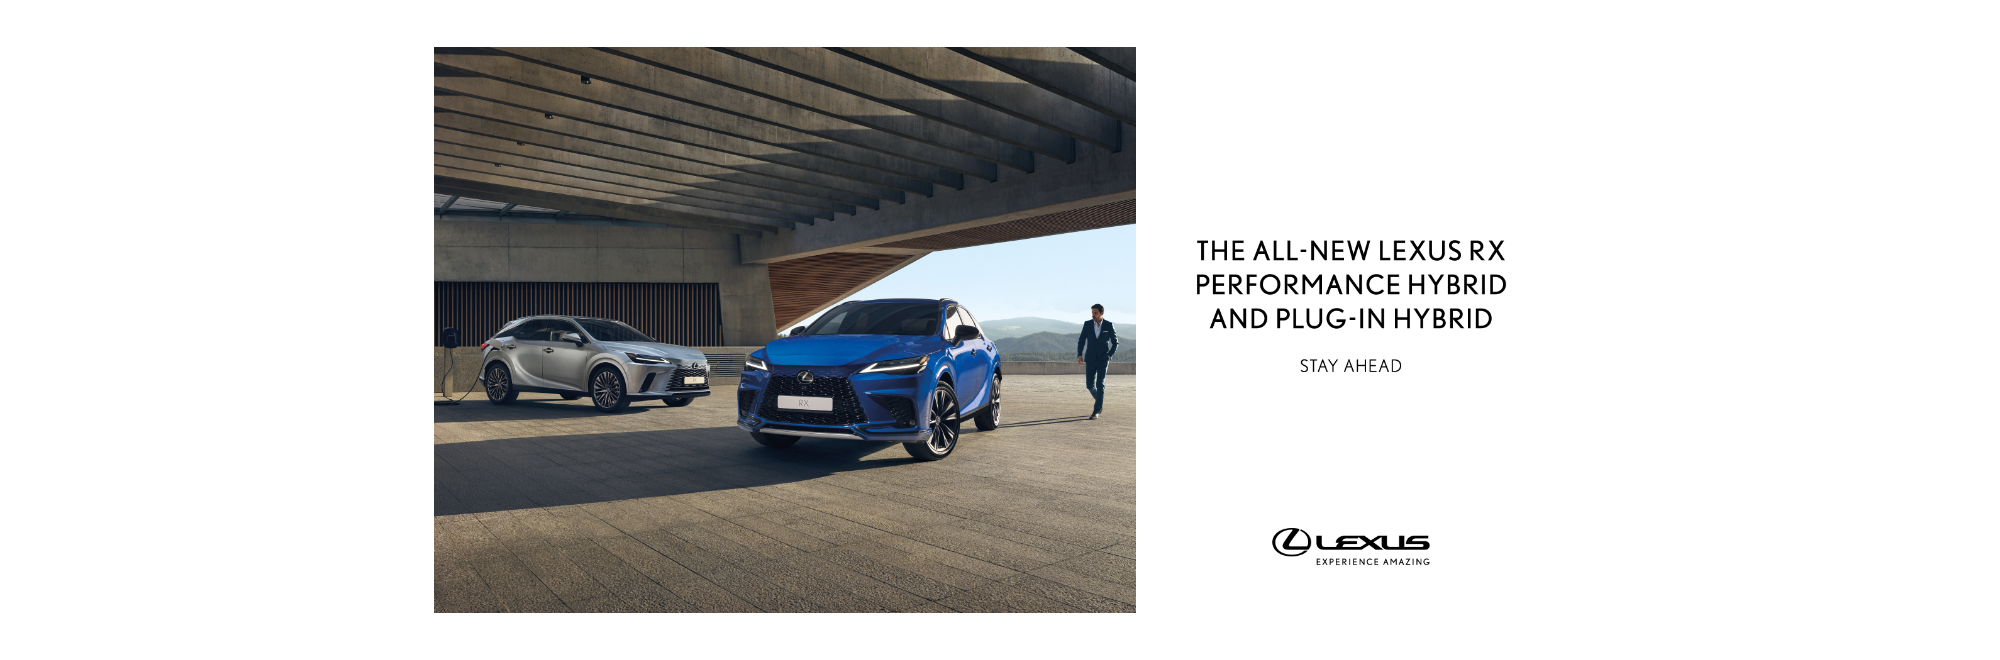 Lexus and The&Partnership create Bond-style campaign for the new RX model